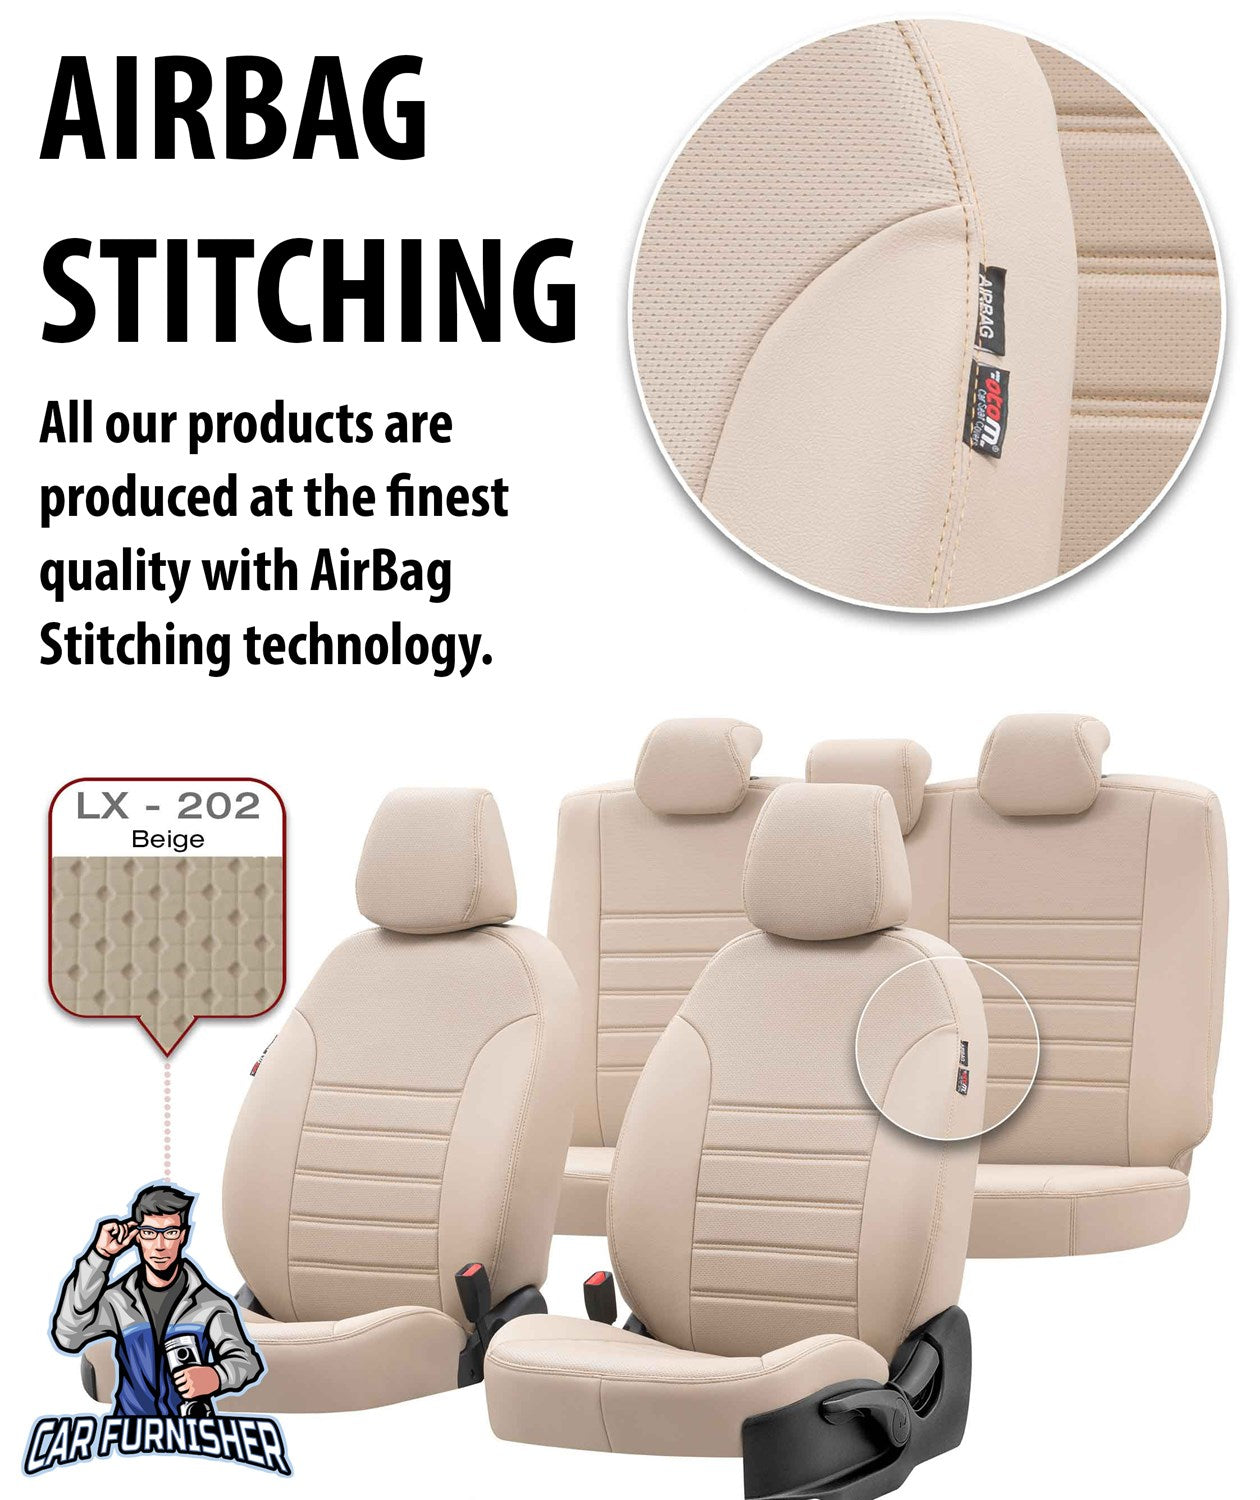 Citroen Jumpy Seat Covers New York Leather Design Smoked Black Leather